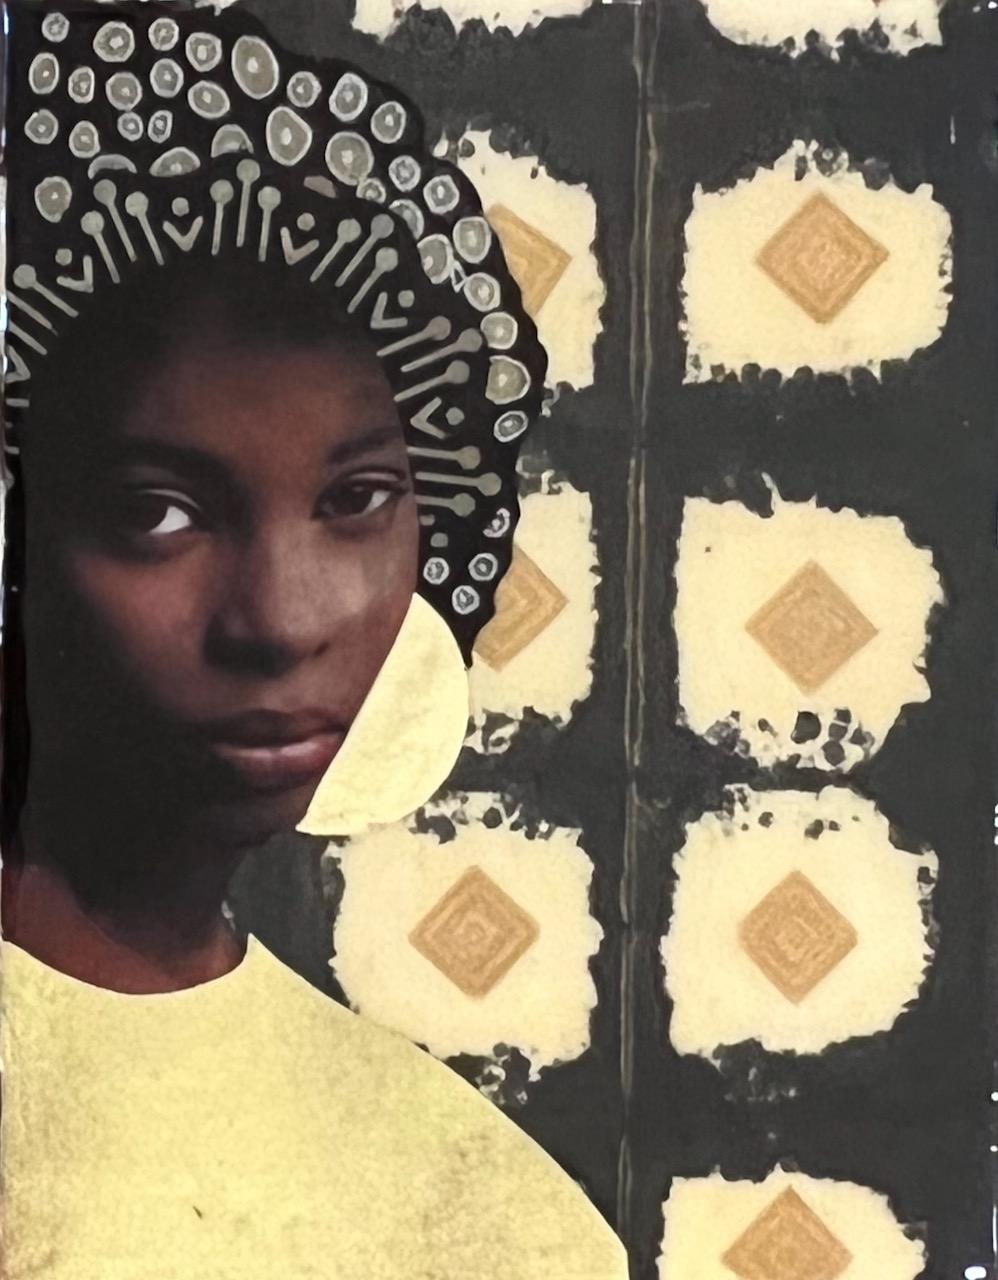 Portrait Painting de Janice Frame - "Crowning Glory" Mixed media portrait of a black woman with black and gold 